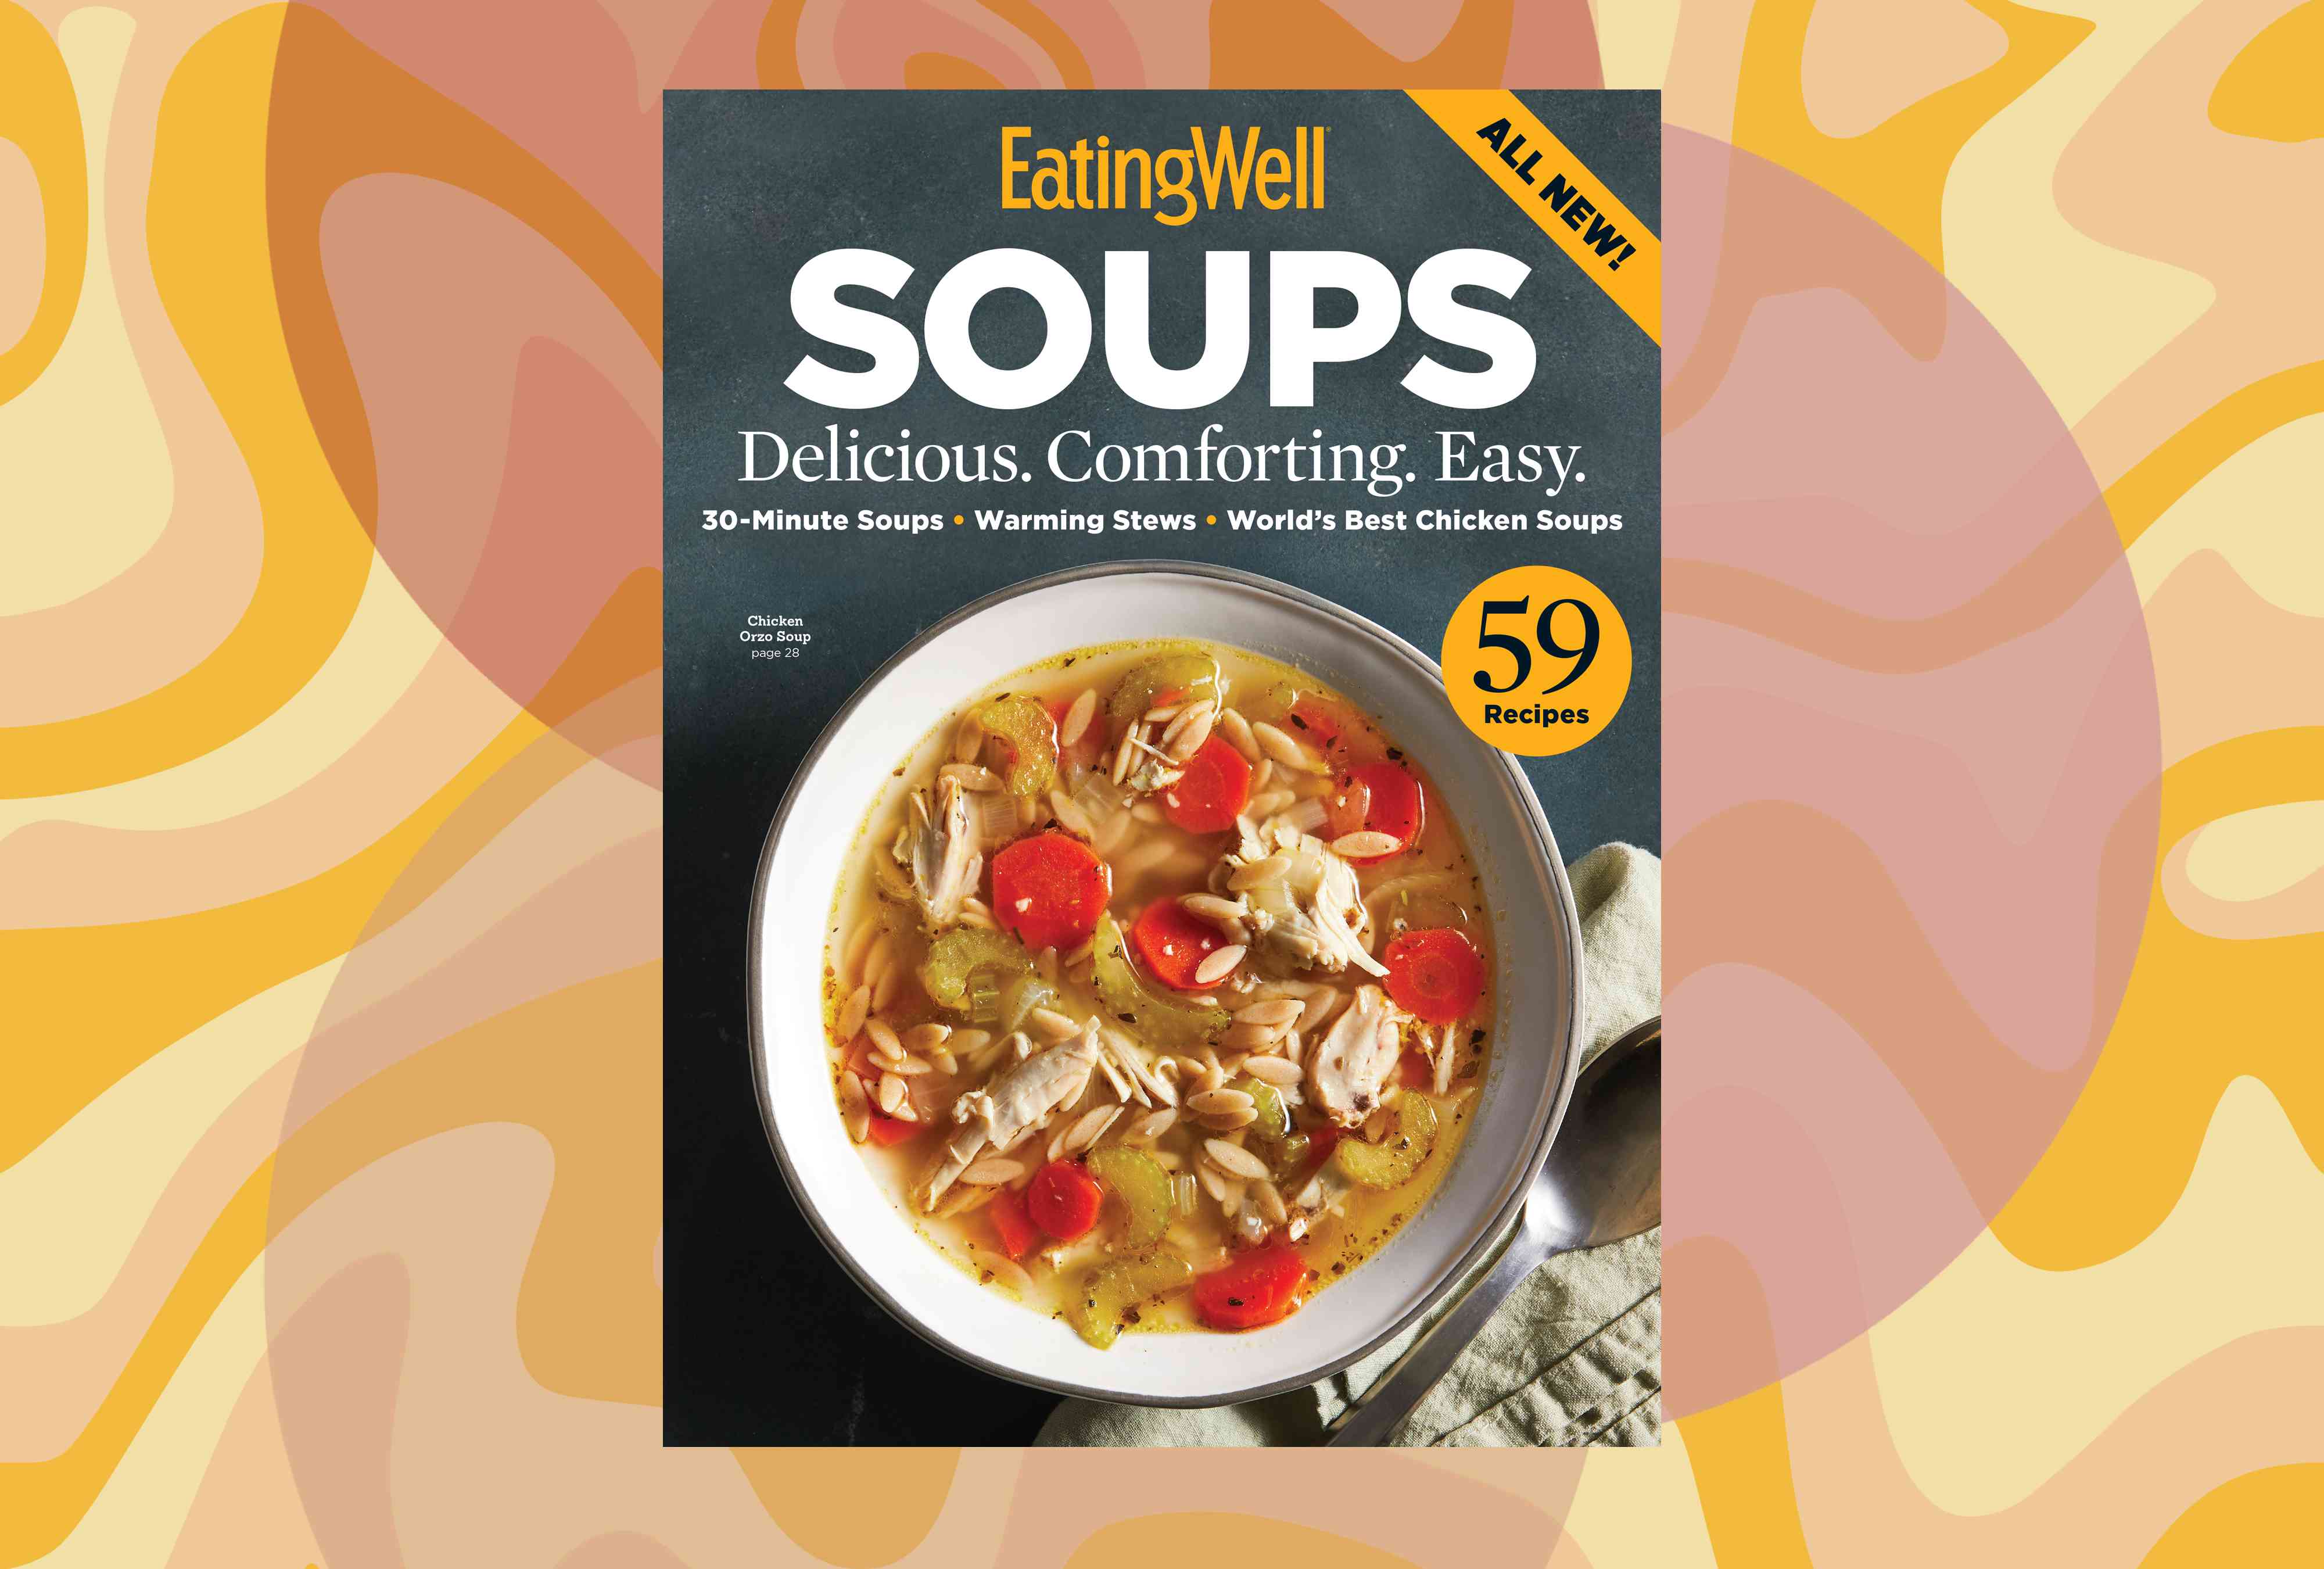 eatingwell's popular special edition magazines are now available by subscription